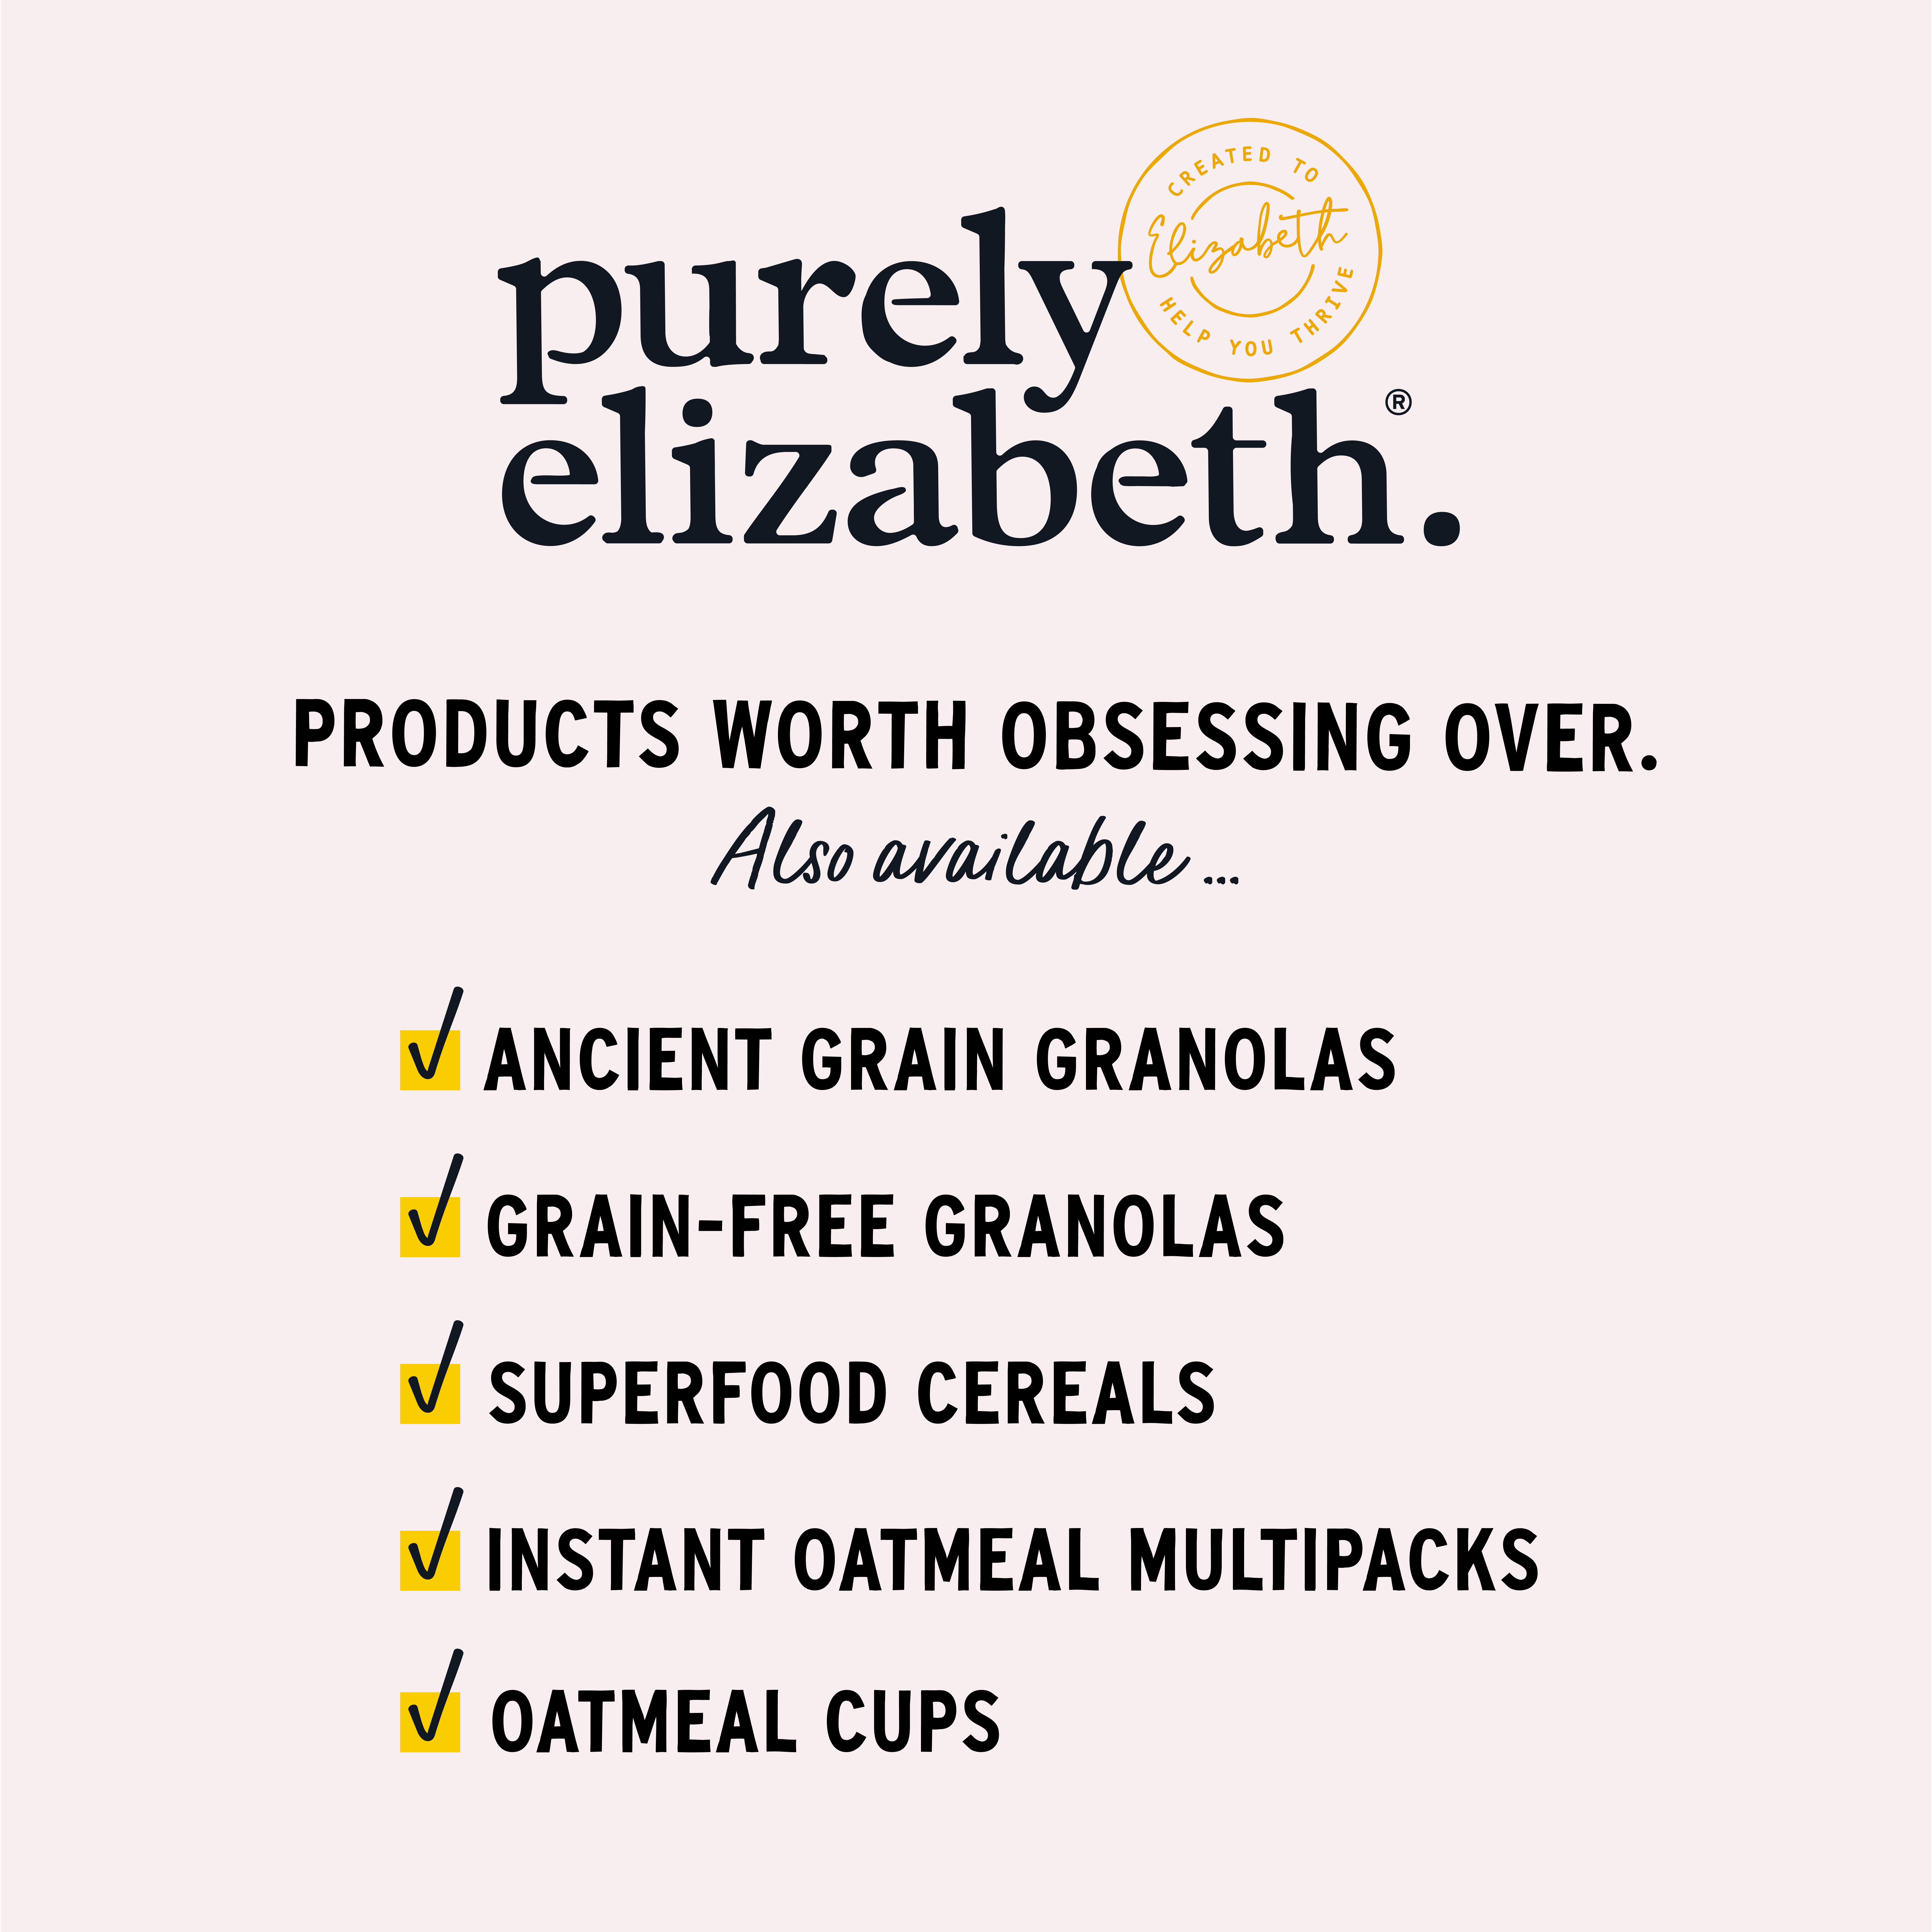 Purely Elizabeth Organic Oats, Flax, & Chia Banana Nut Instant Oatmeal, 1.52 oz, 6 Count - image 7 of 8